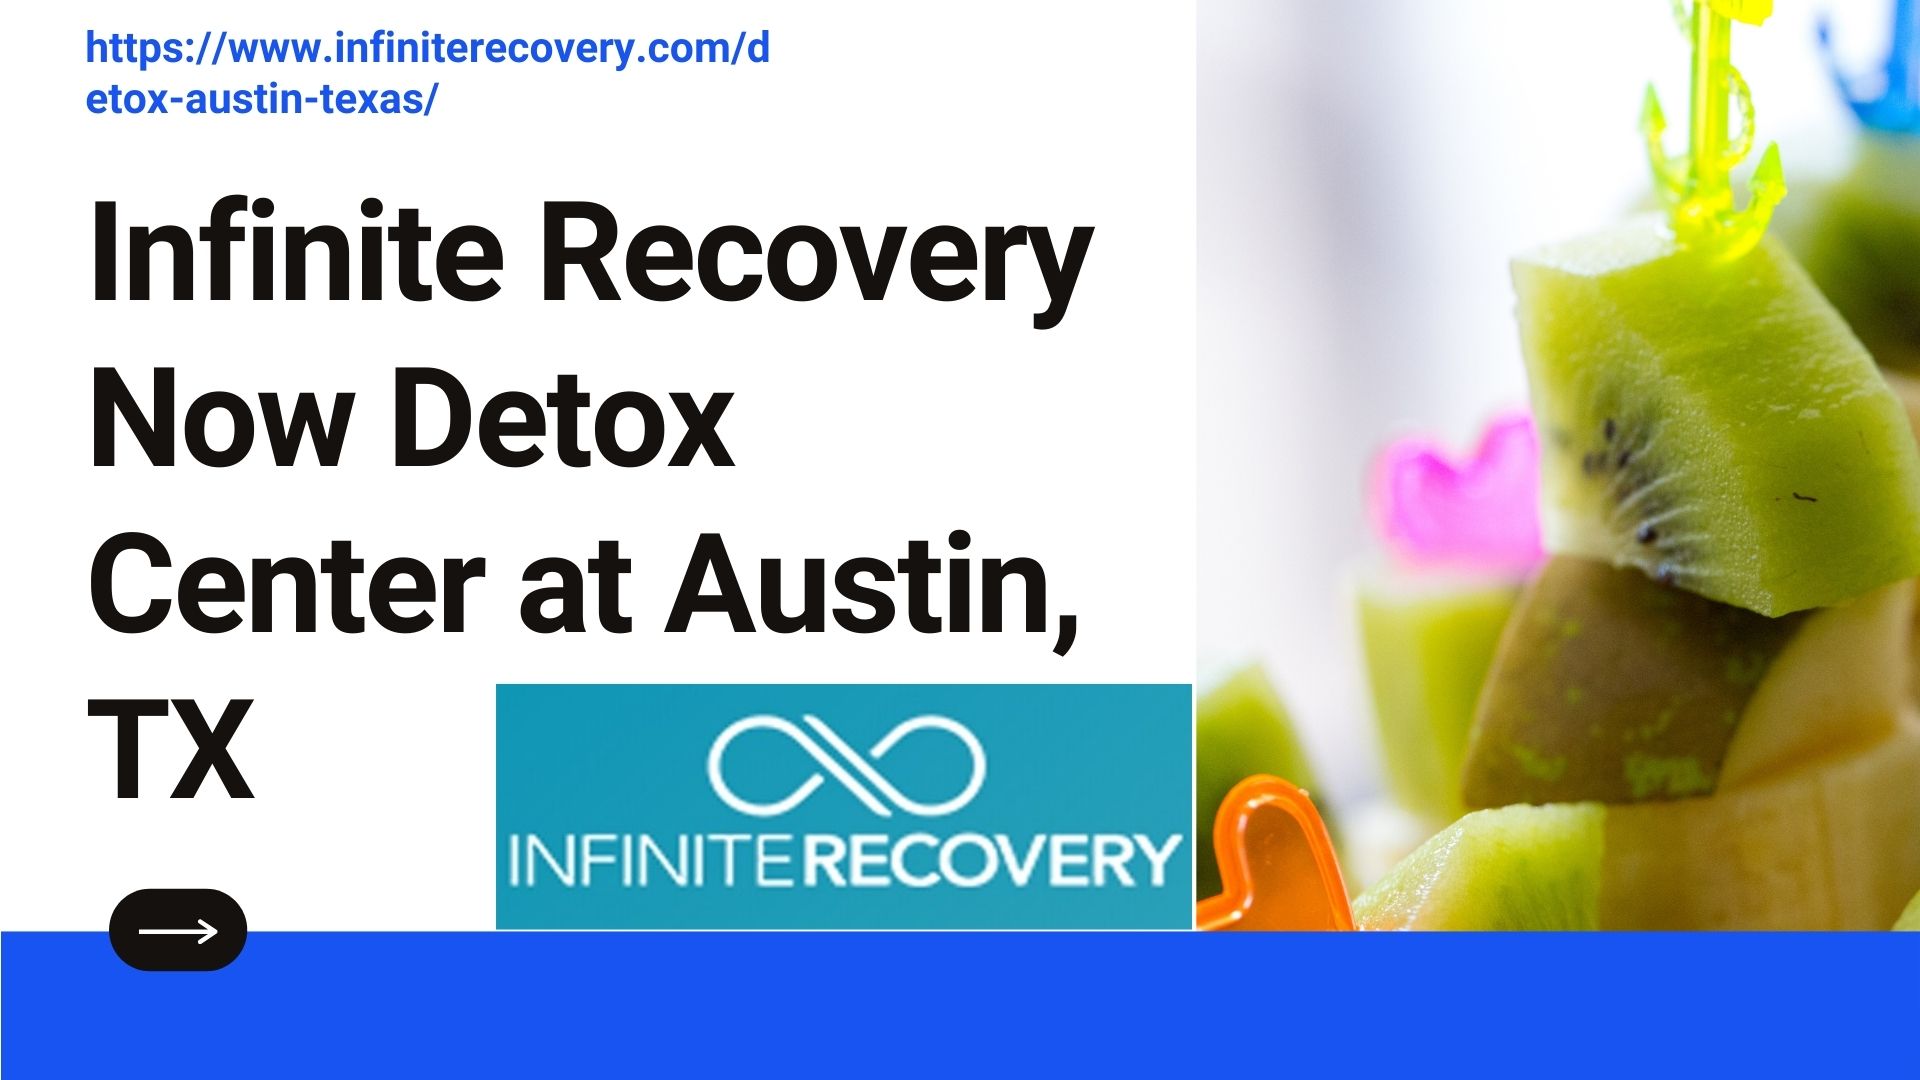 Infinite Recovery Now Detox Center at Austin, TX